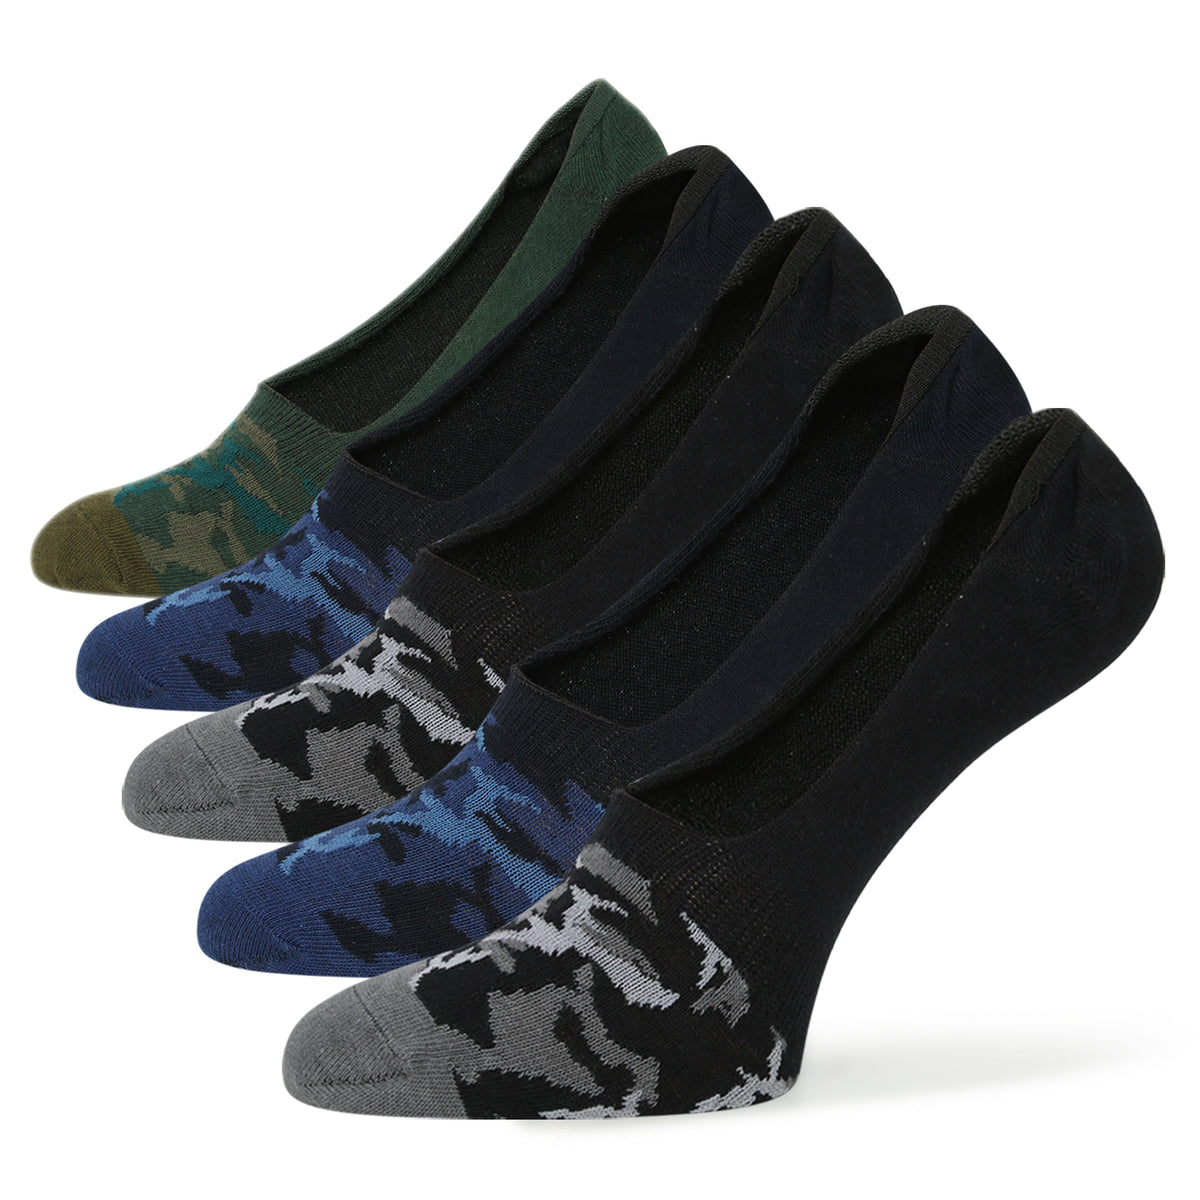 Camo Invisible Socks 5 Pack